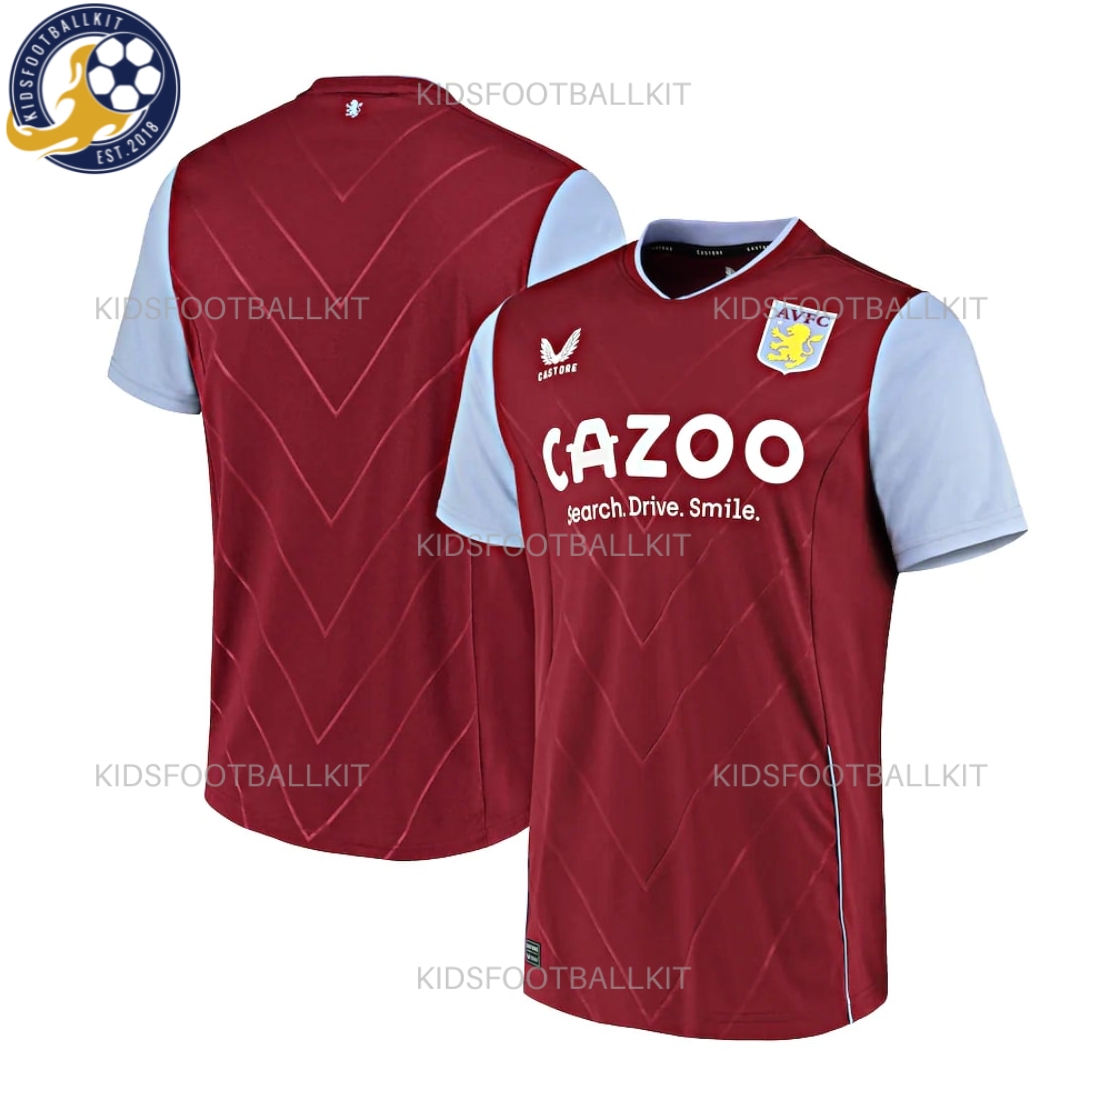 Aston Villa Home Kit 22/23 | Discounted Price from £25.99